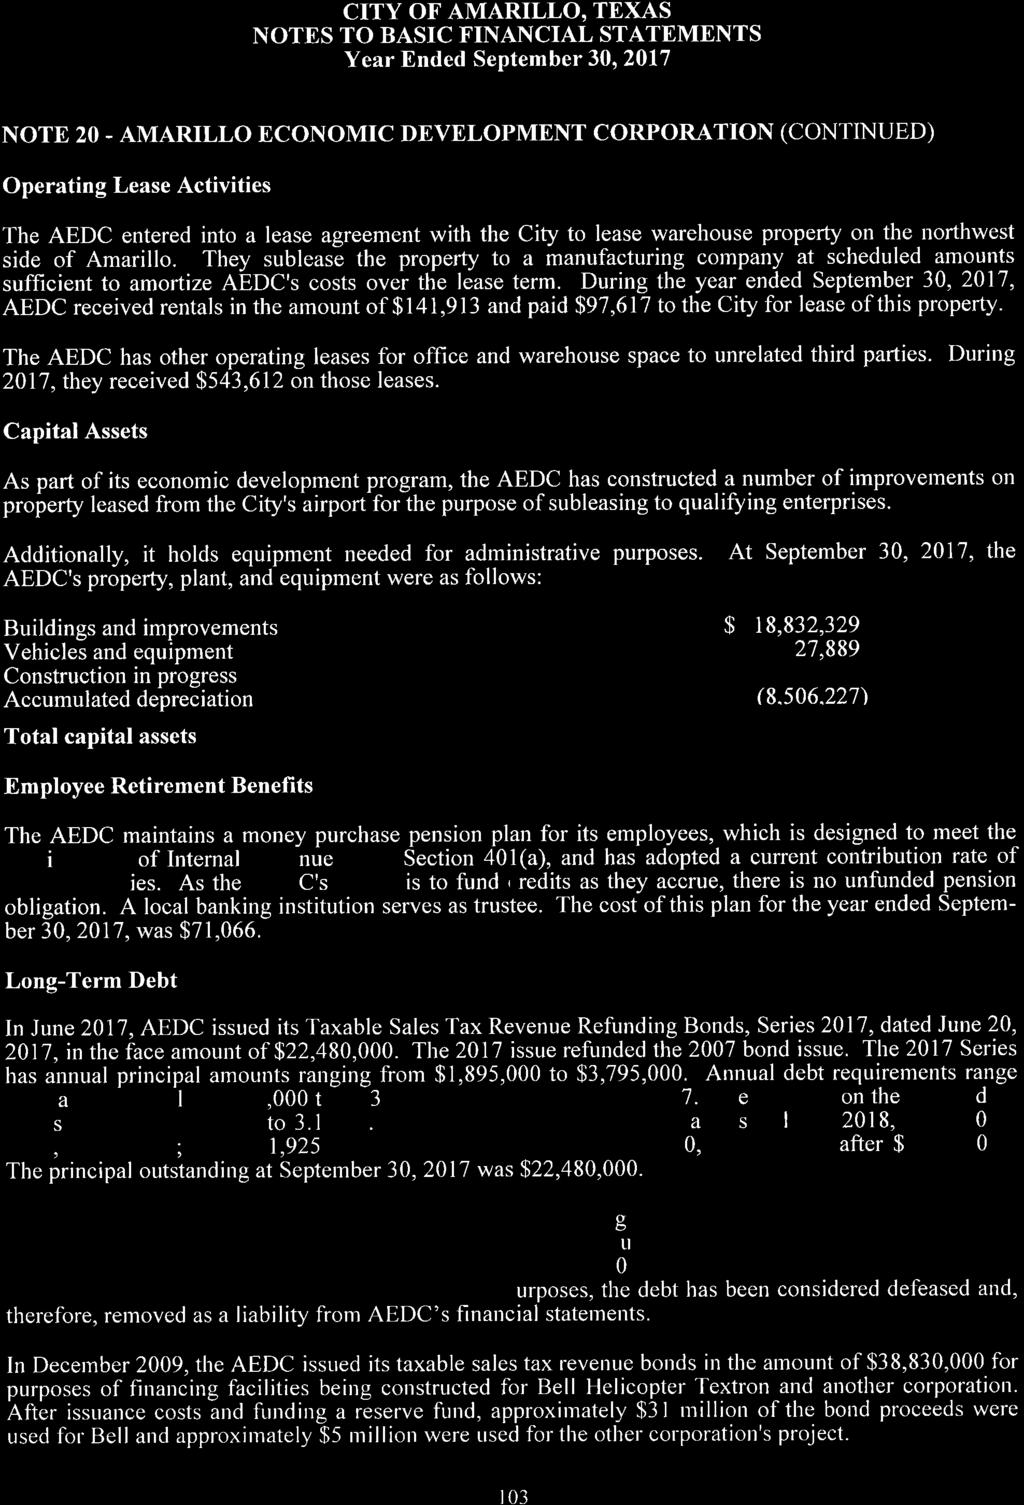 CITY OF AMARILLO, TEXAS NOTES TO BASIC FINANCIAL STATEMENTS Year Ended September 30'2017 NOTE 20 - AMARTLLO ECONOMTC DEVELOPMENT CORPORATION (CONTINUED) Operating Lease Activities The AEDC entered